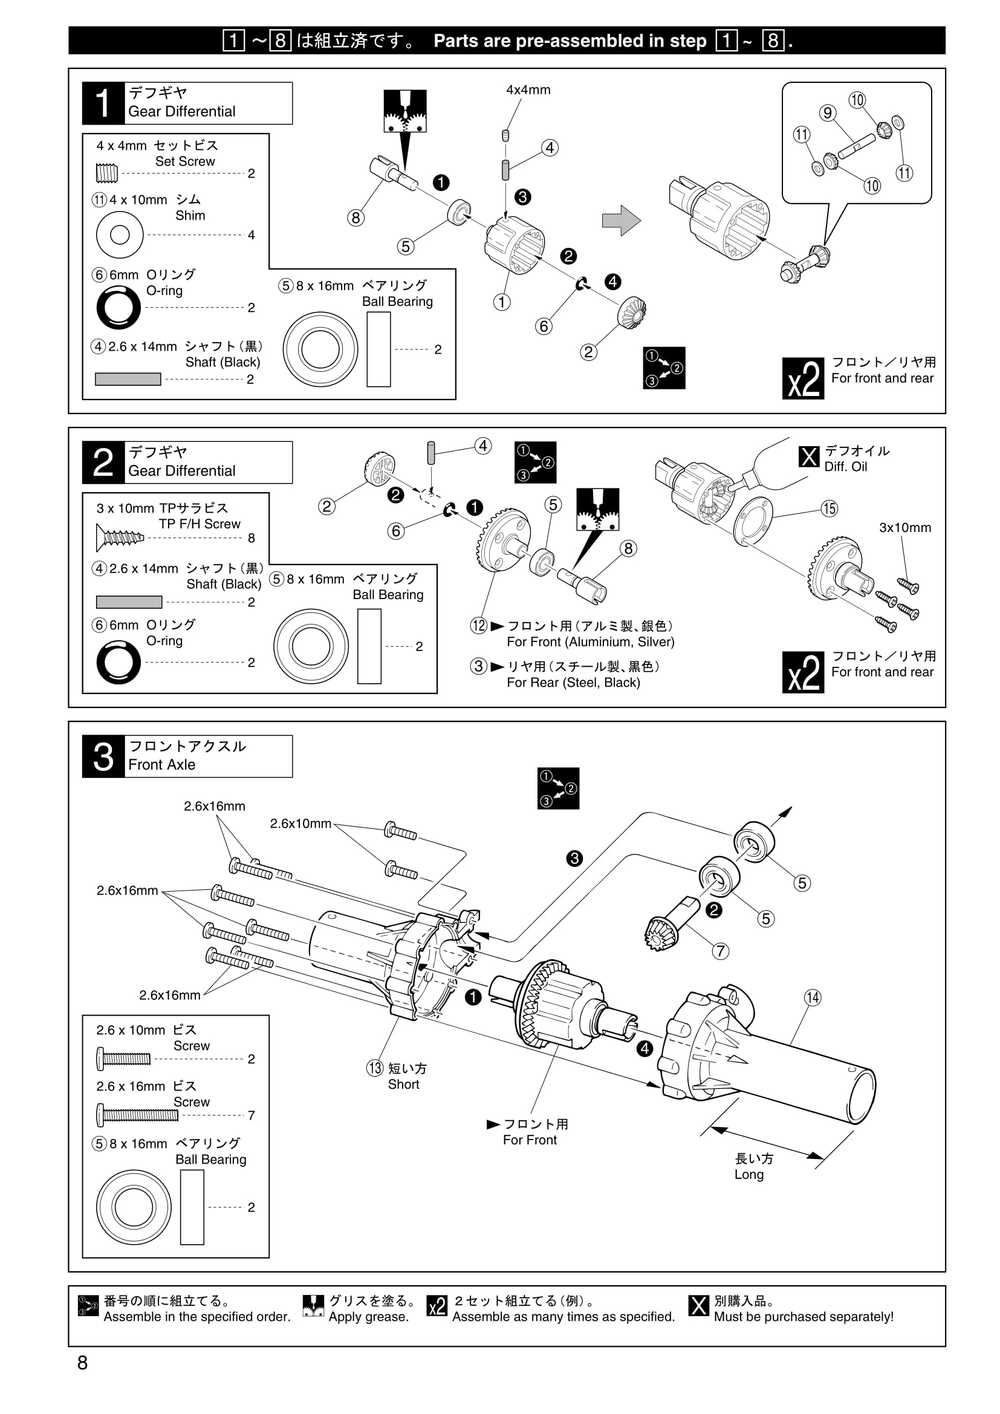 Kyosho - 31221 - Mad-Force - Manual - Page 08